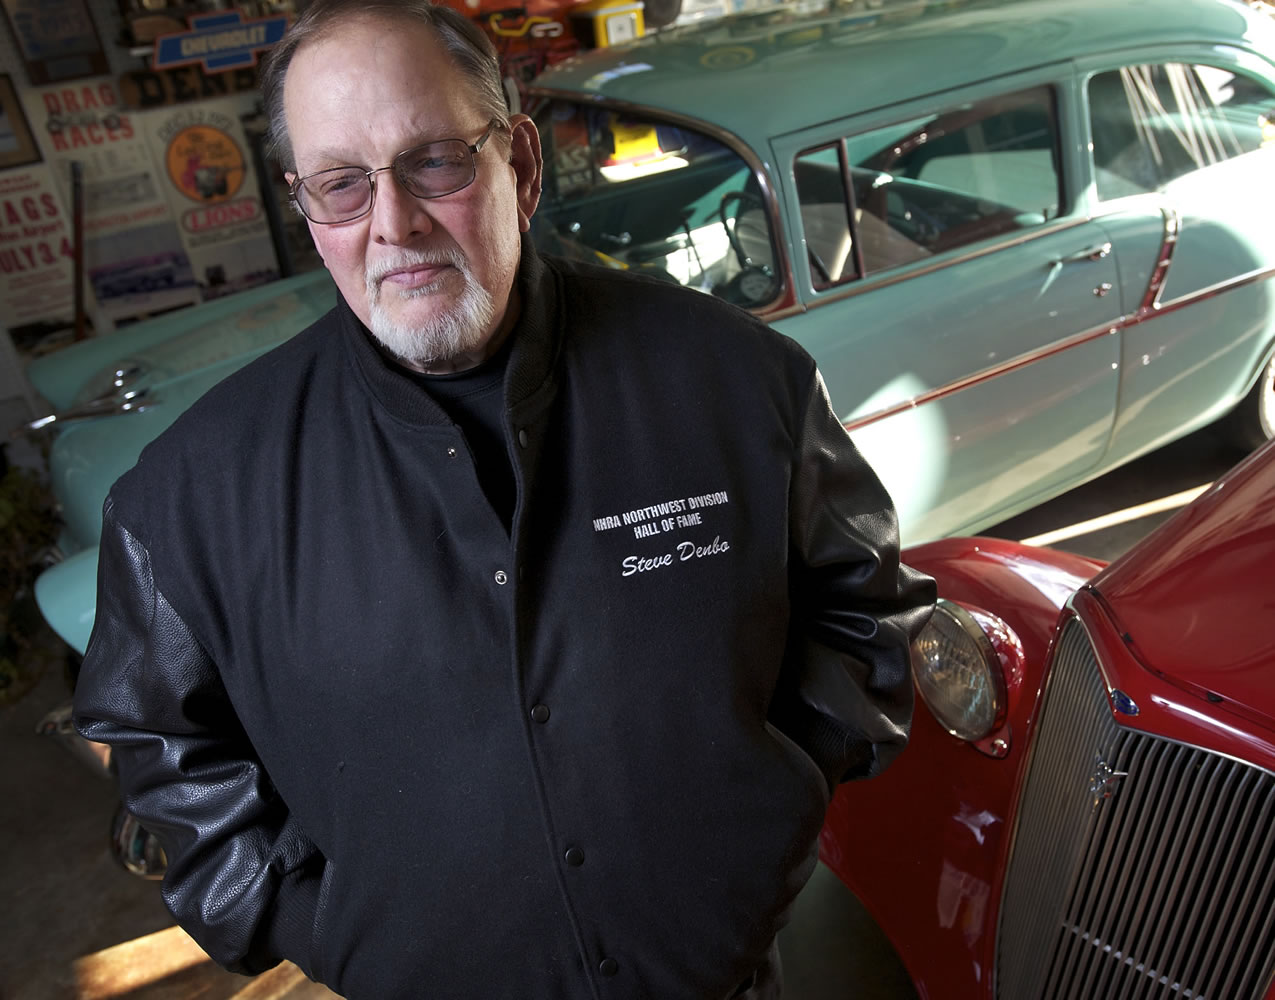 Steve Denbo, who was inducted into the NHRA hall of fame last weekend, poses with his cars at his Hazel Dell home.